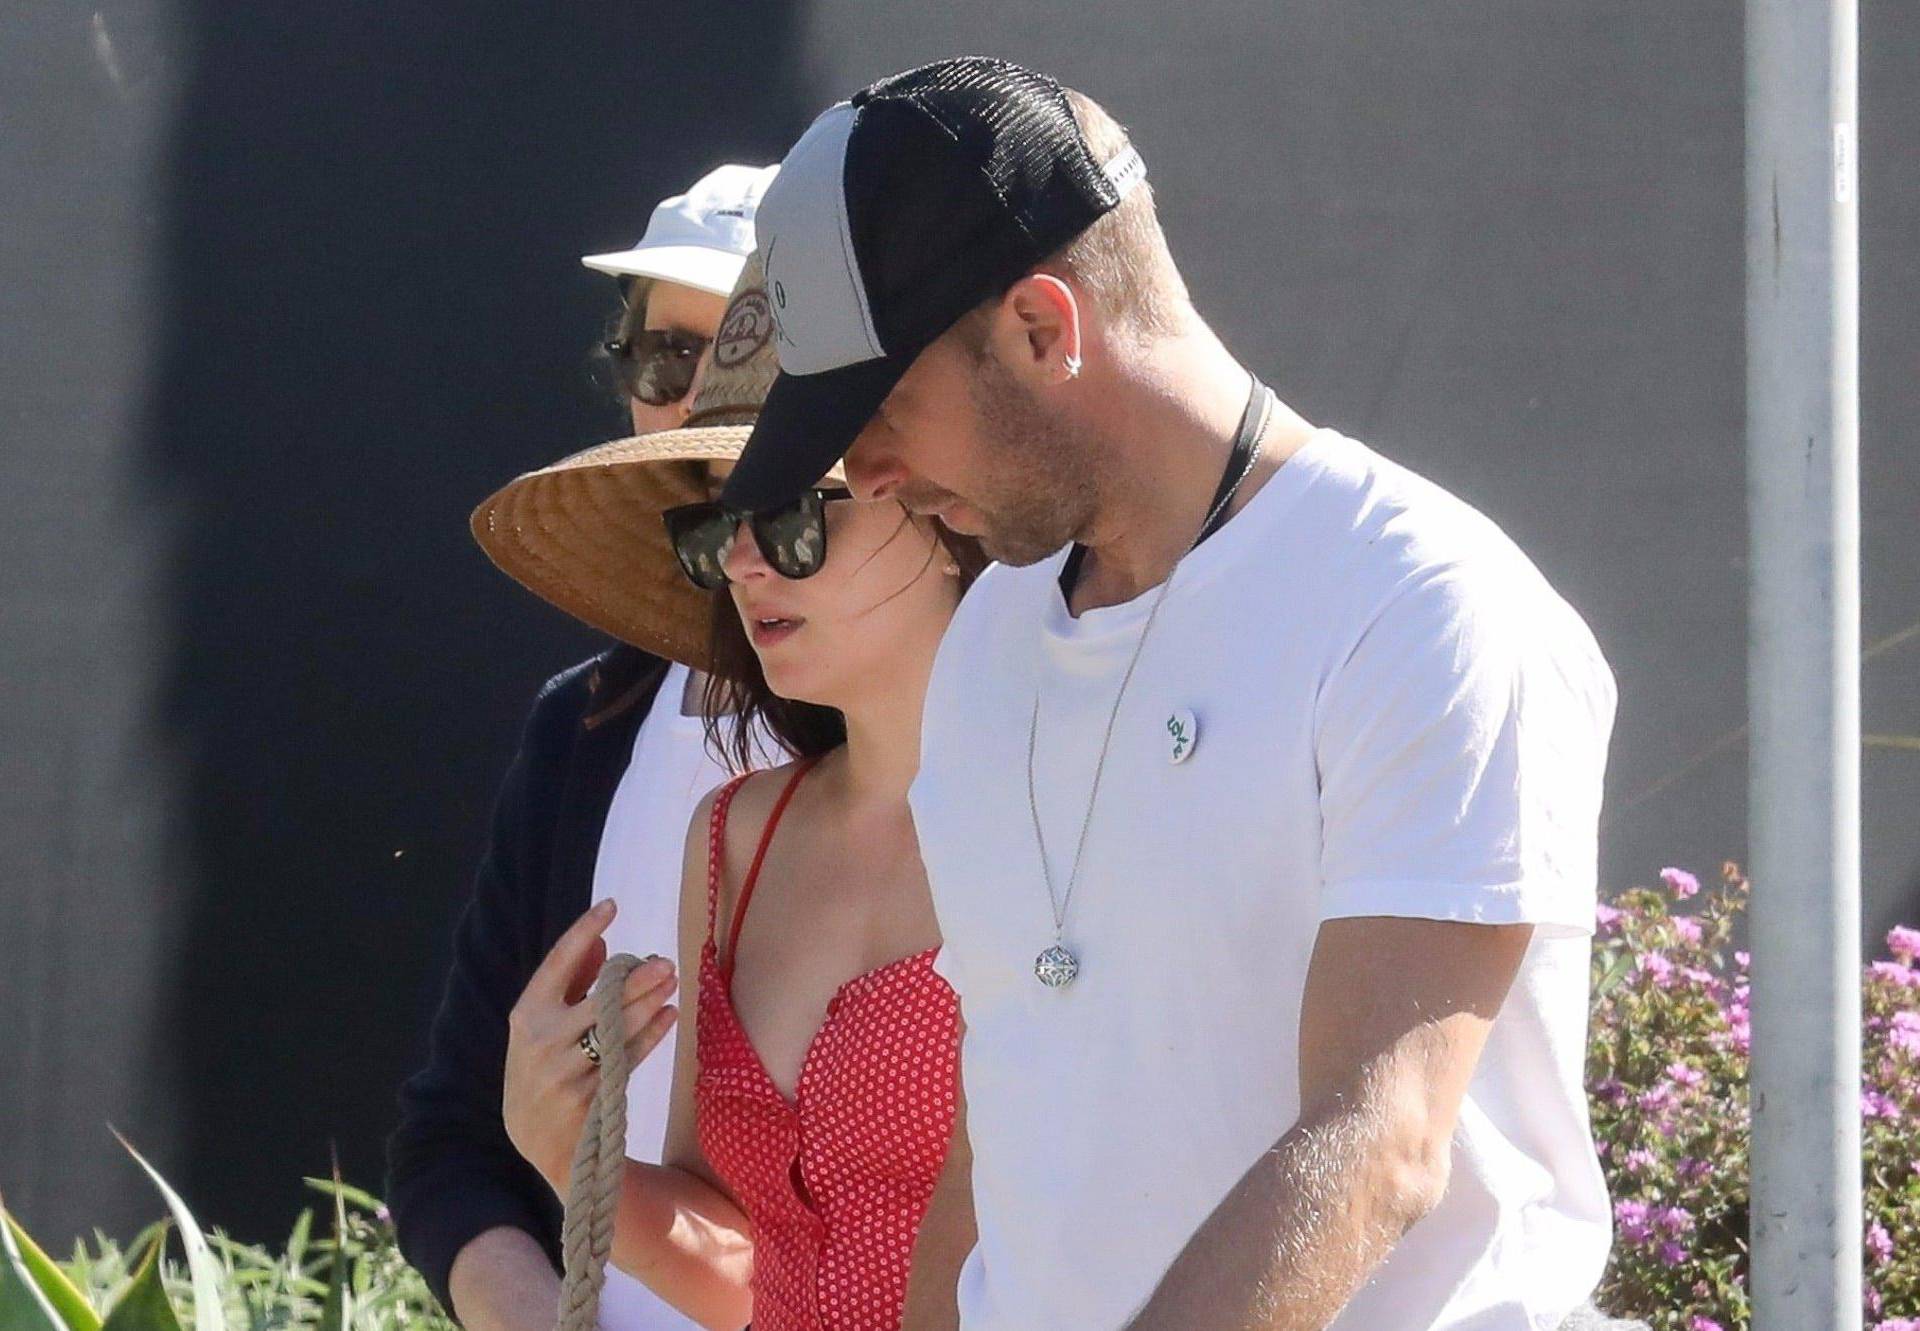 *EXCLUSIVE* Chris Martin and Dakota Johnson barefoot in the park with pup